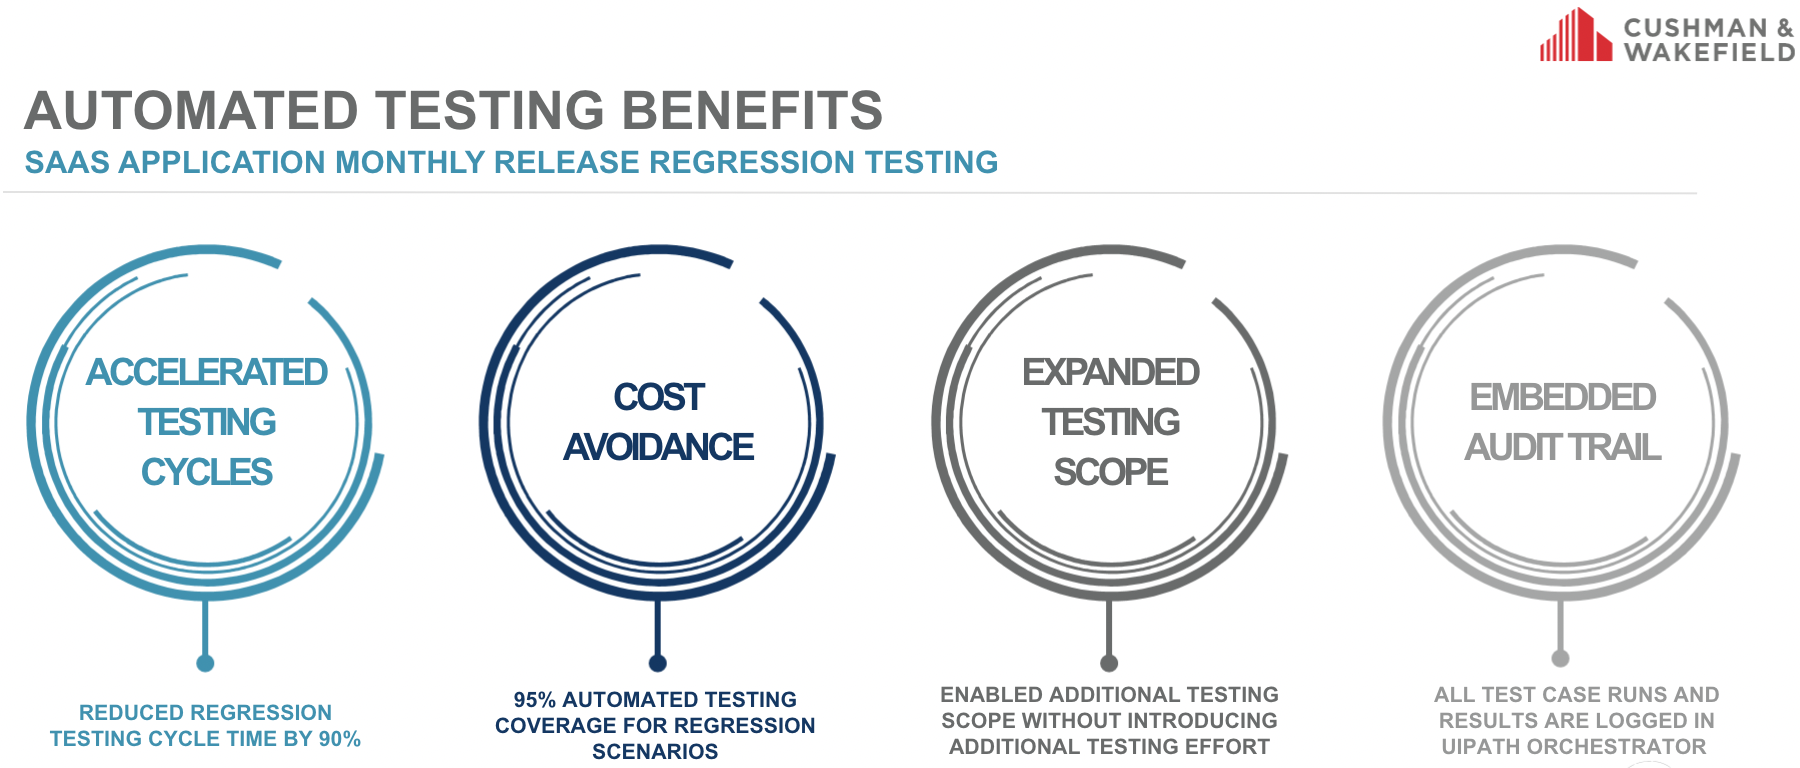 automated testing benefits cushman and wakefield 